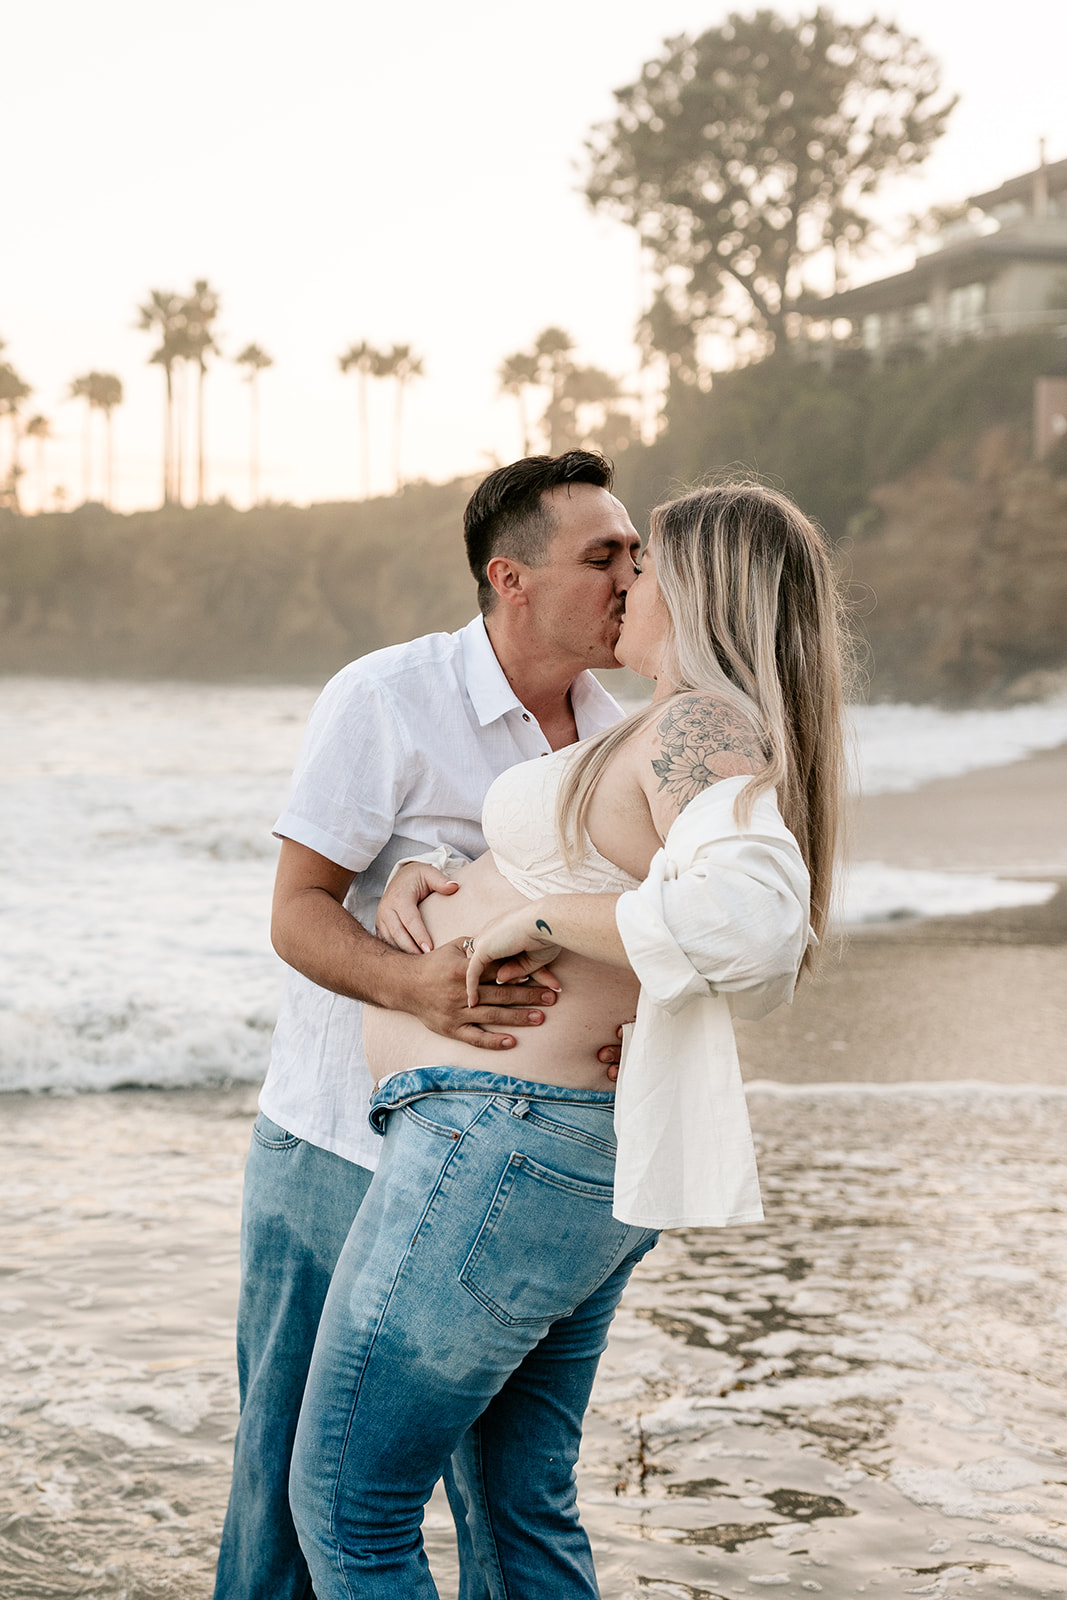 laguna beach socal southern california maternity family pictures best beaches locations photoshoot locations ideas photo